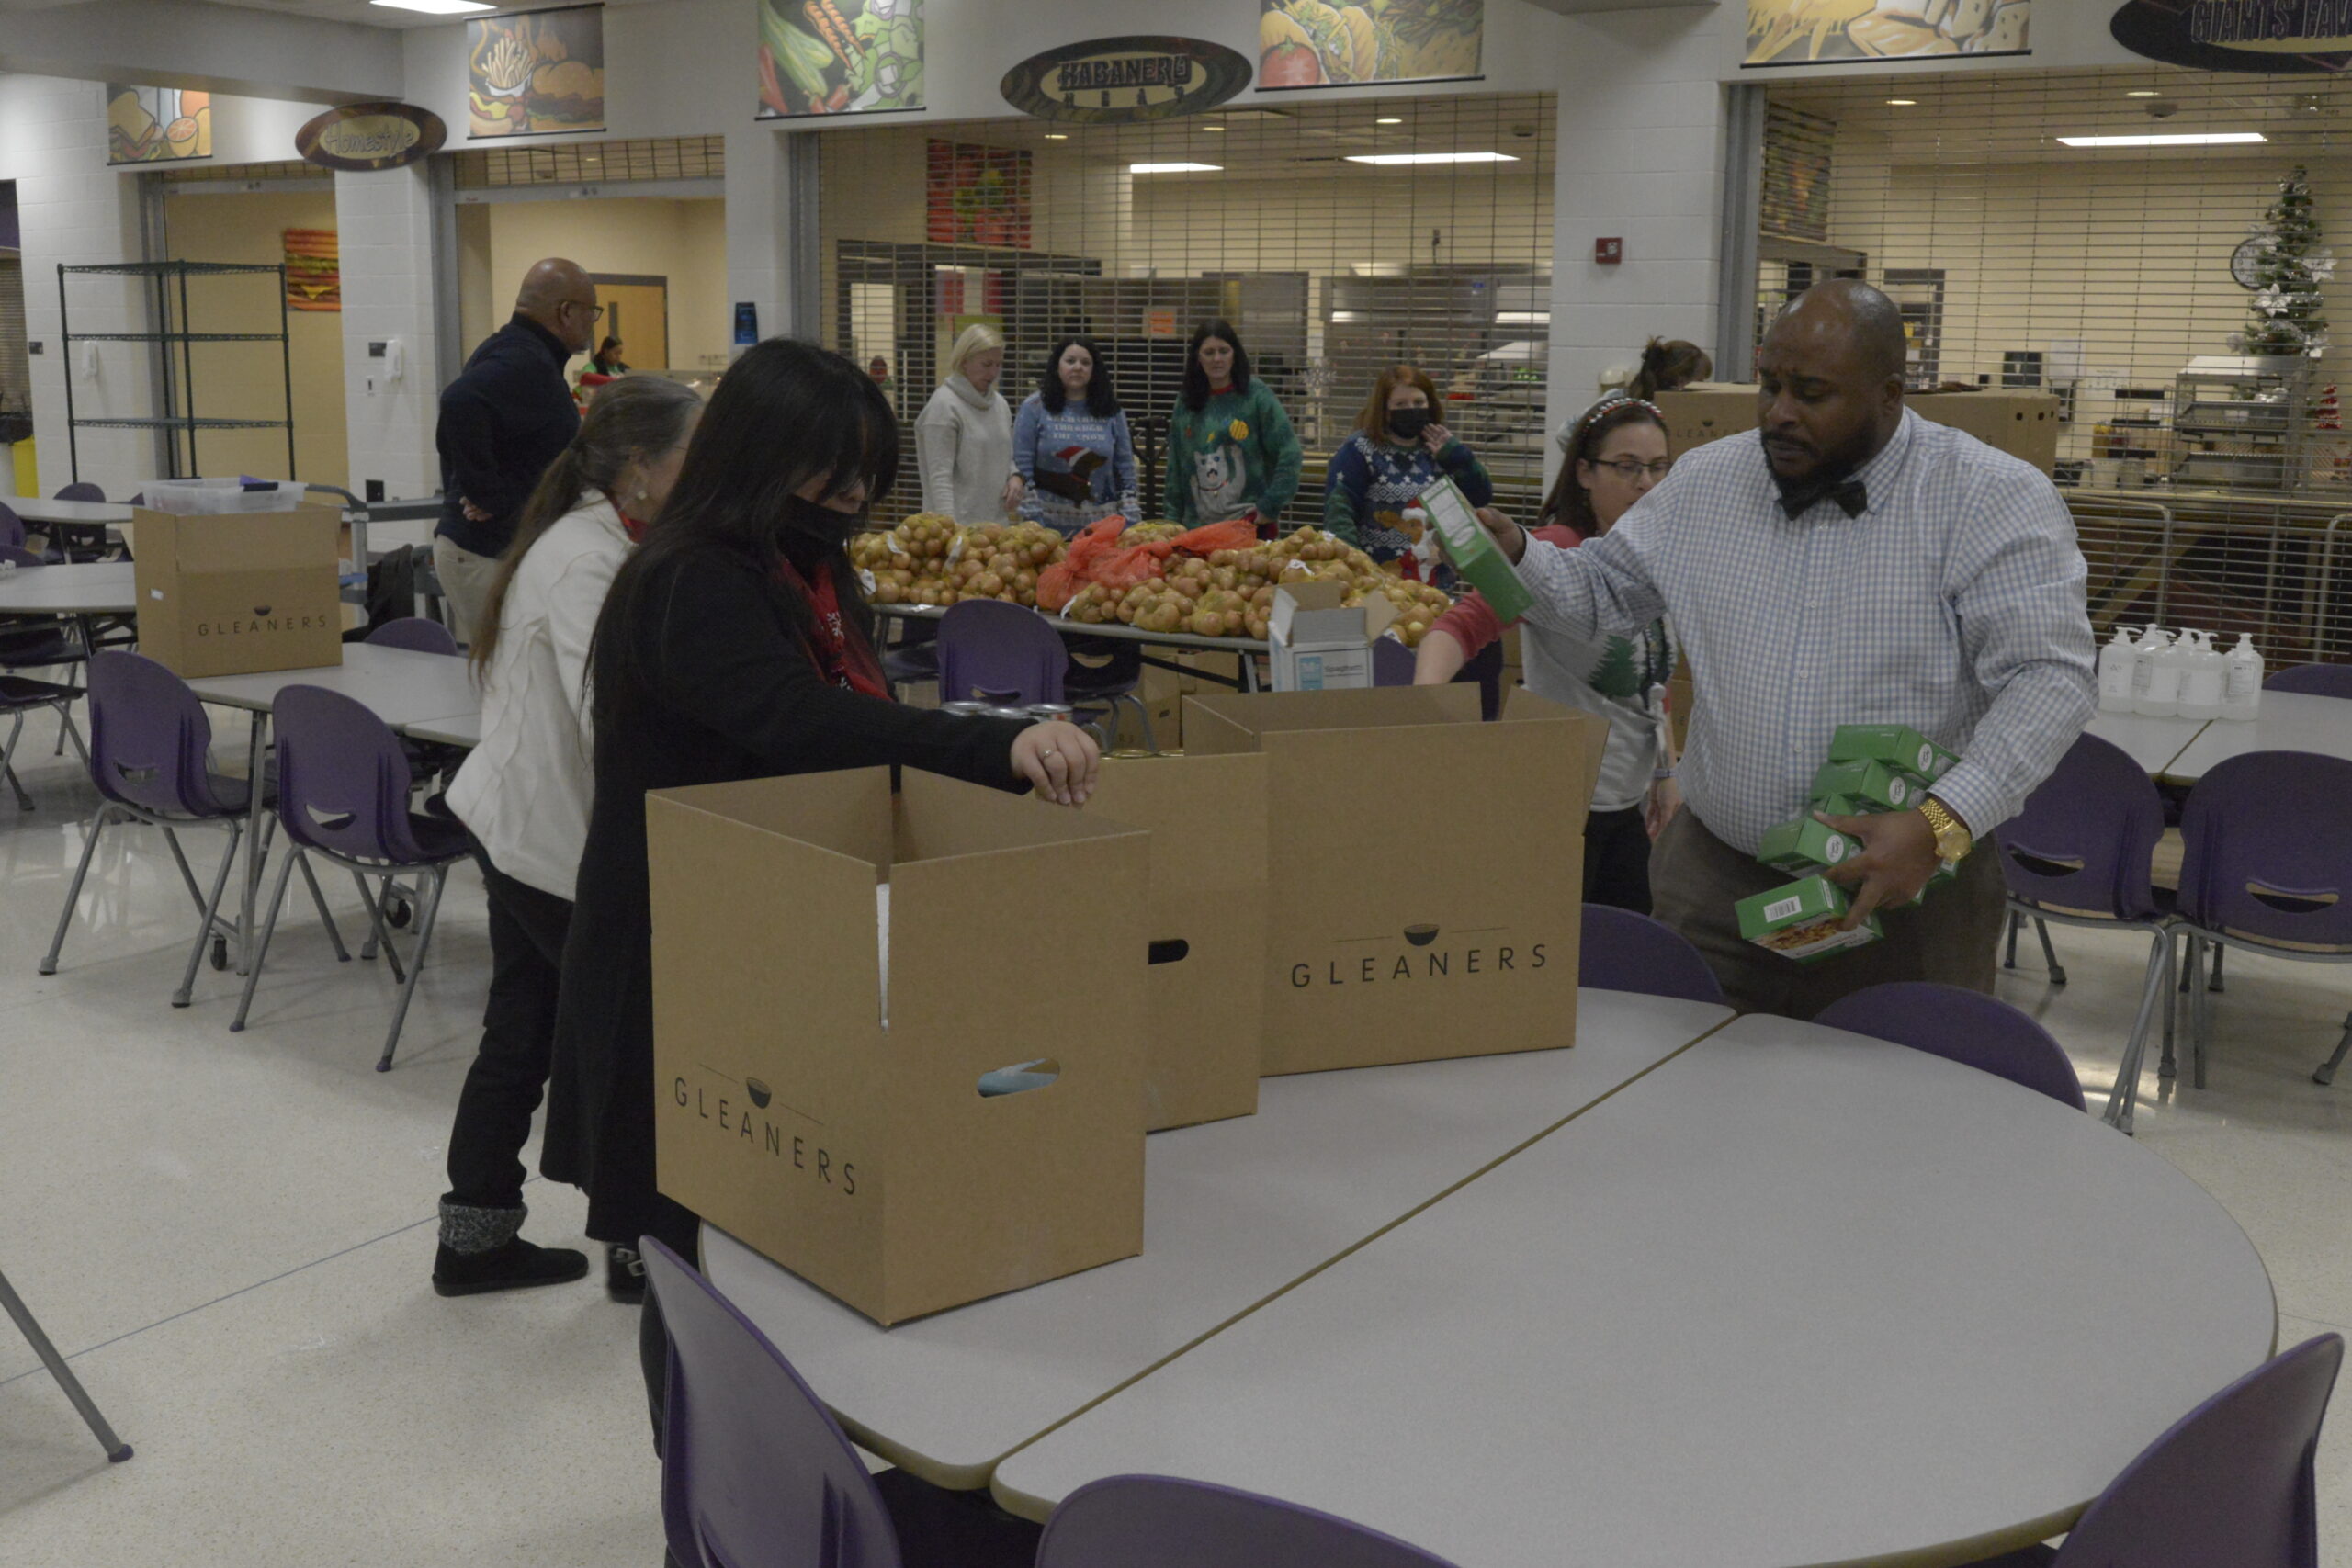 Grant from Hoover Family Foundation Helps Feed Wayne Families in Need